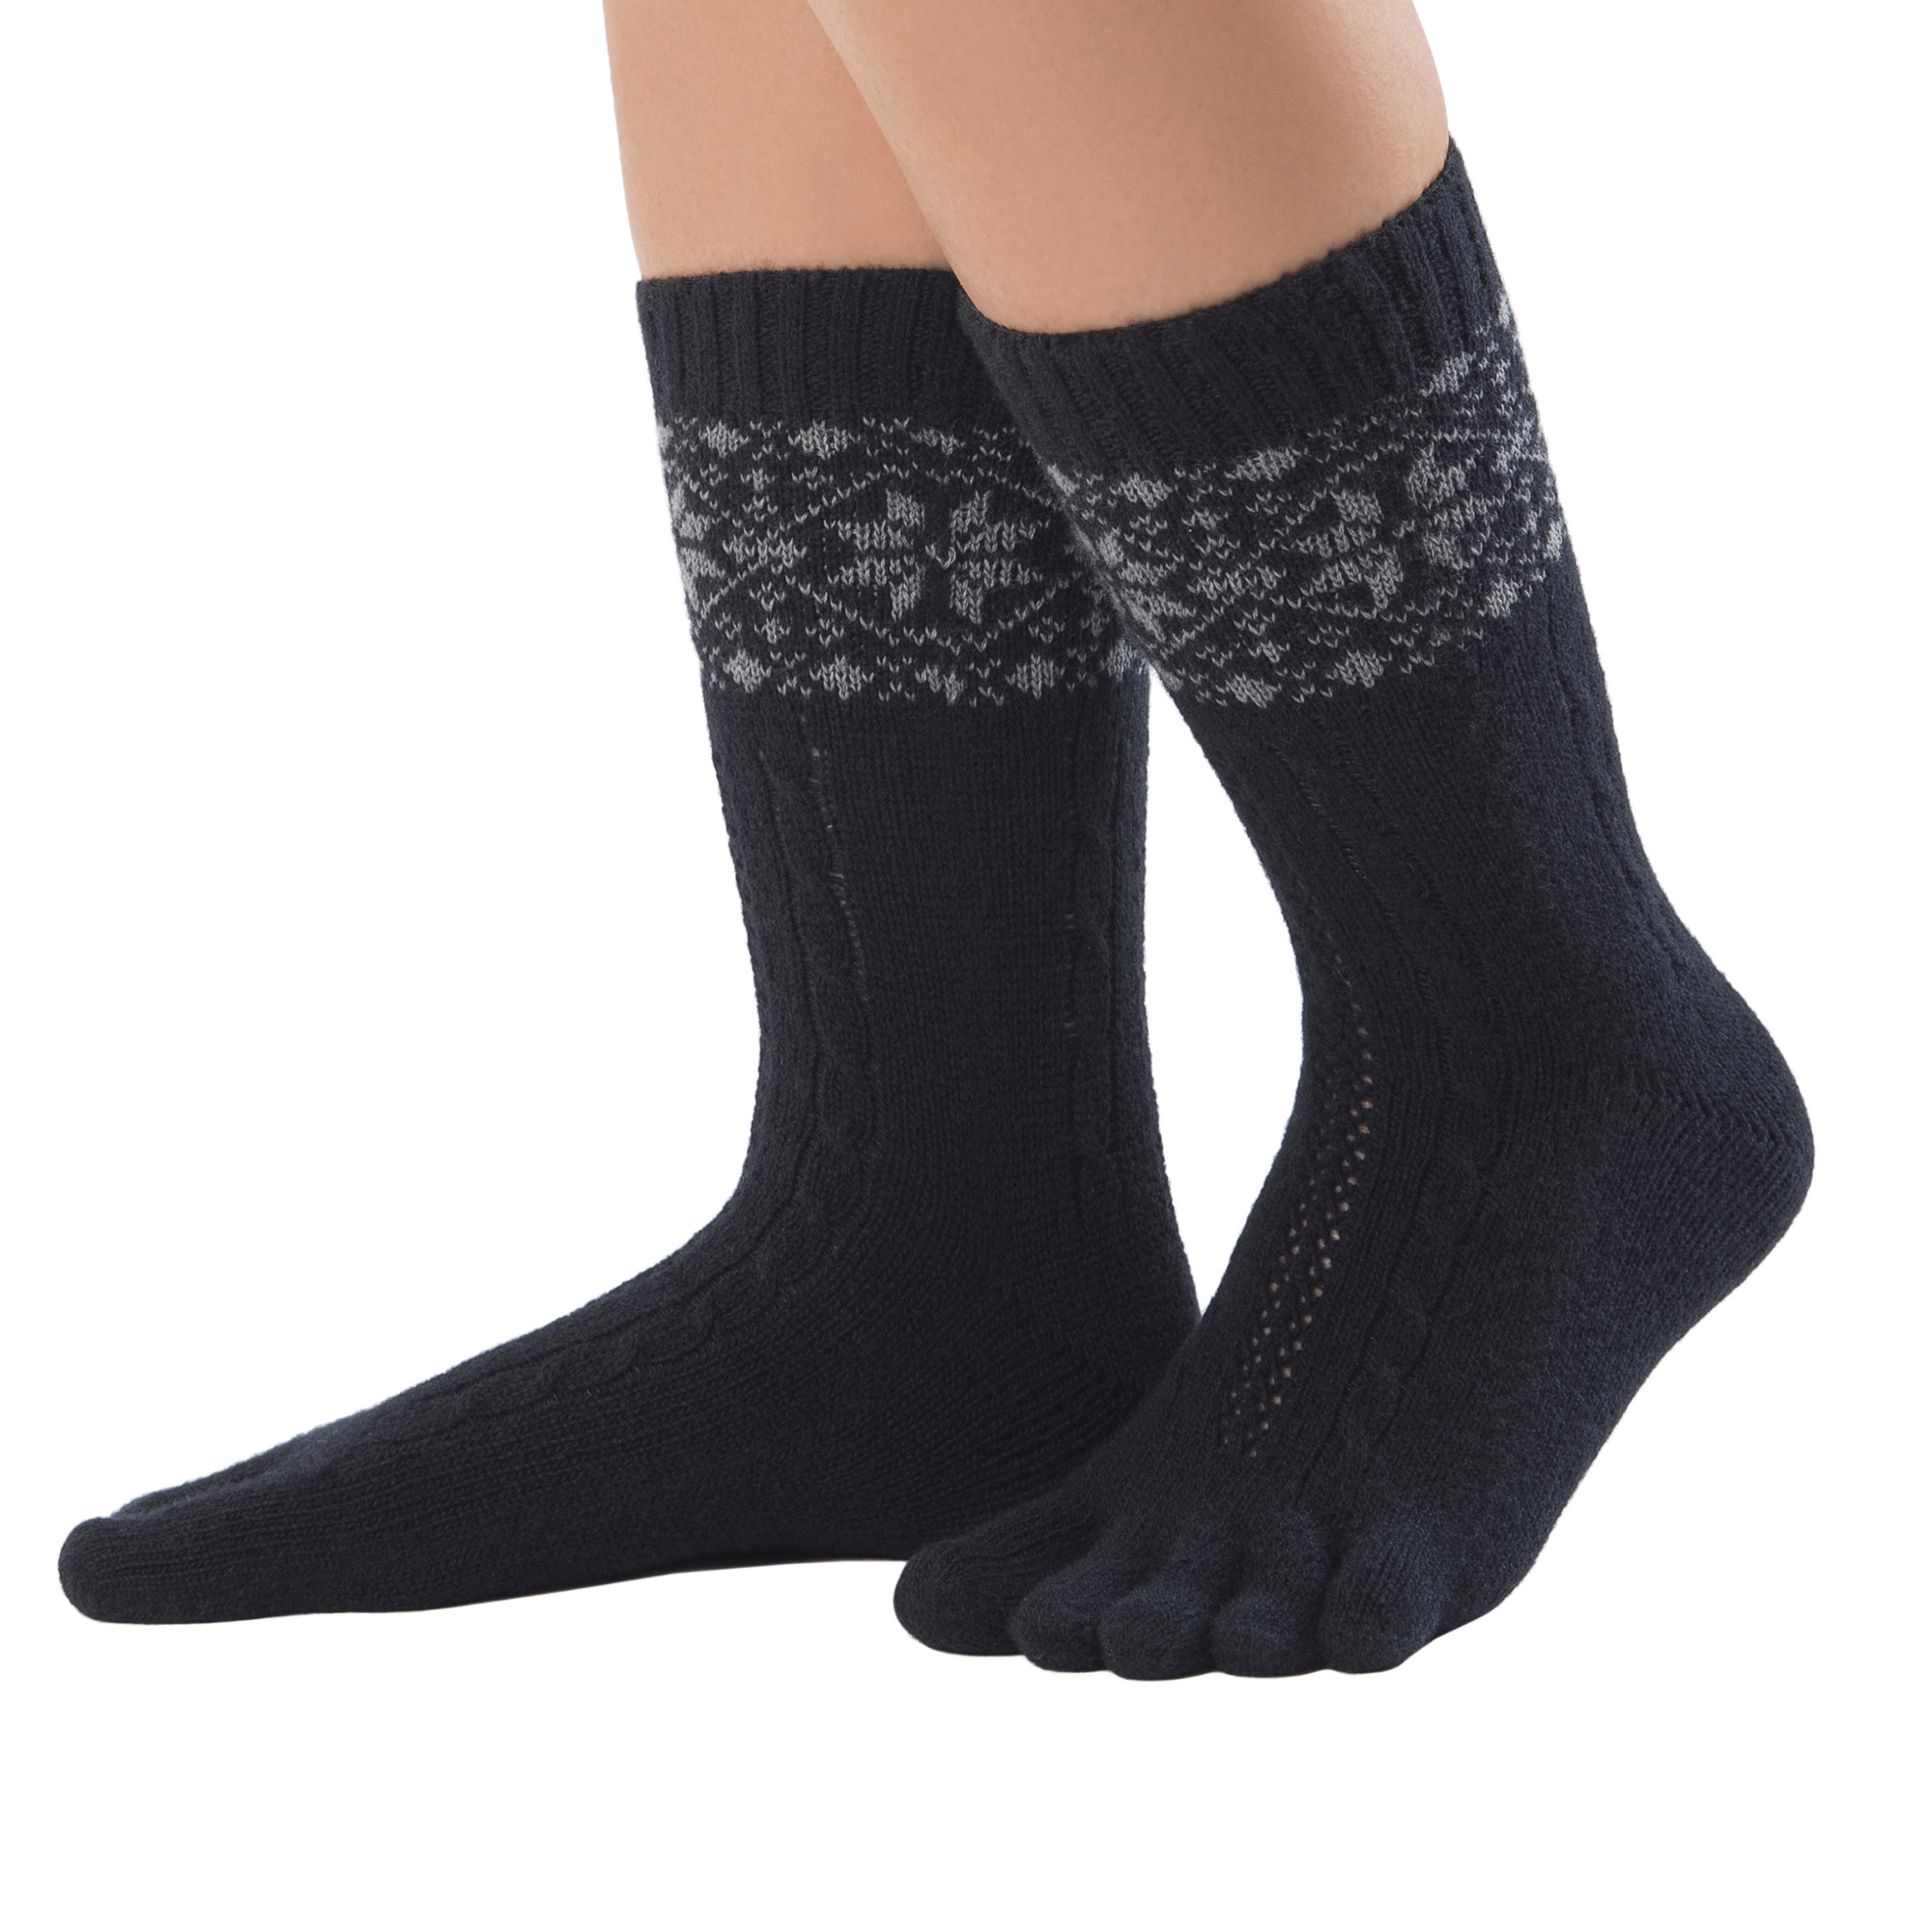  Knitido warm merino & cashmere toe socks with snow patches pattern in black /grey